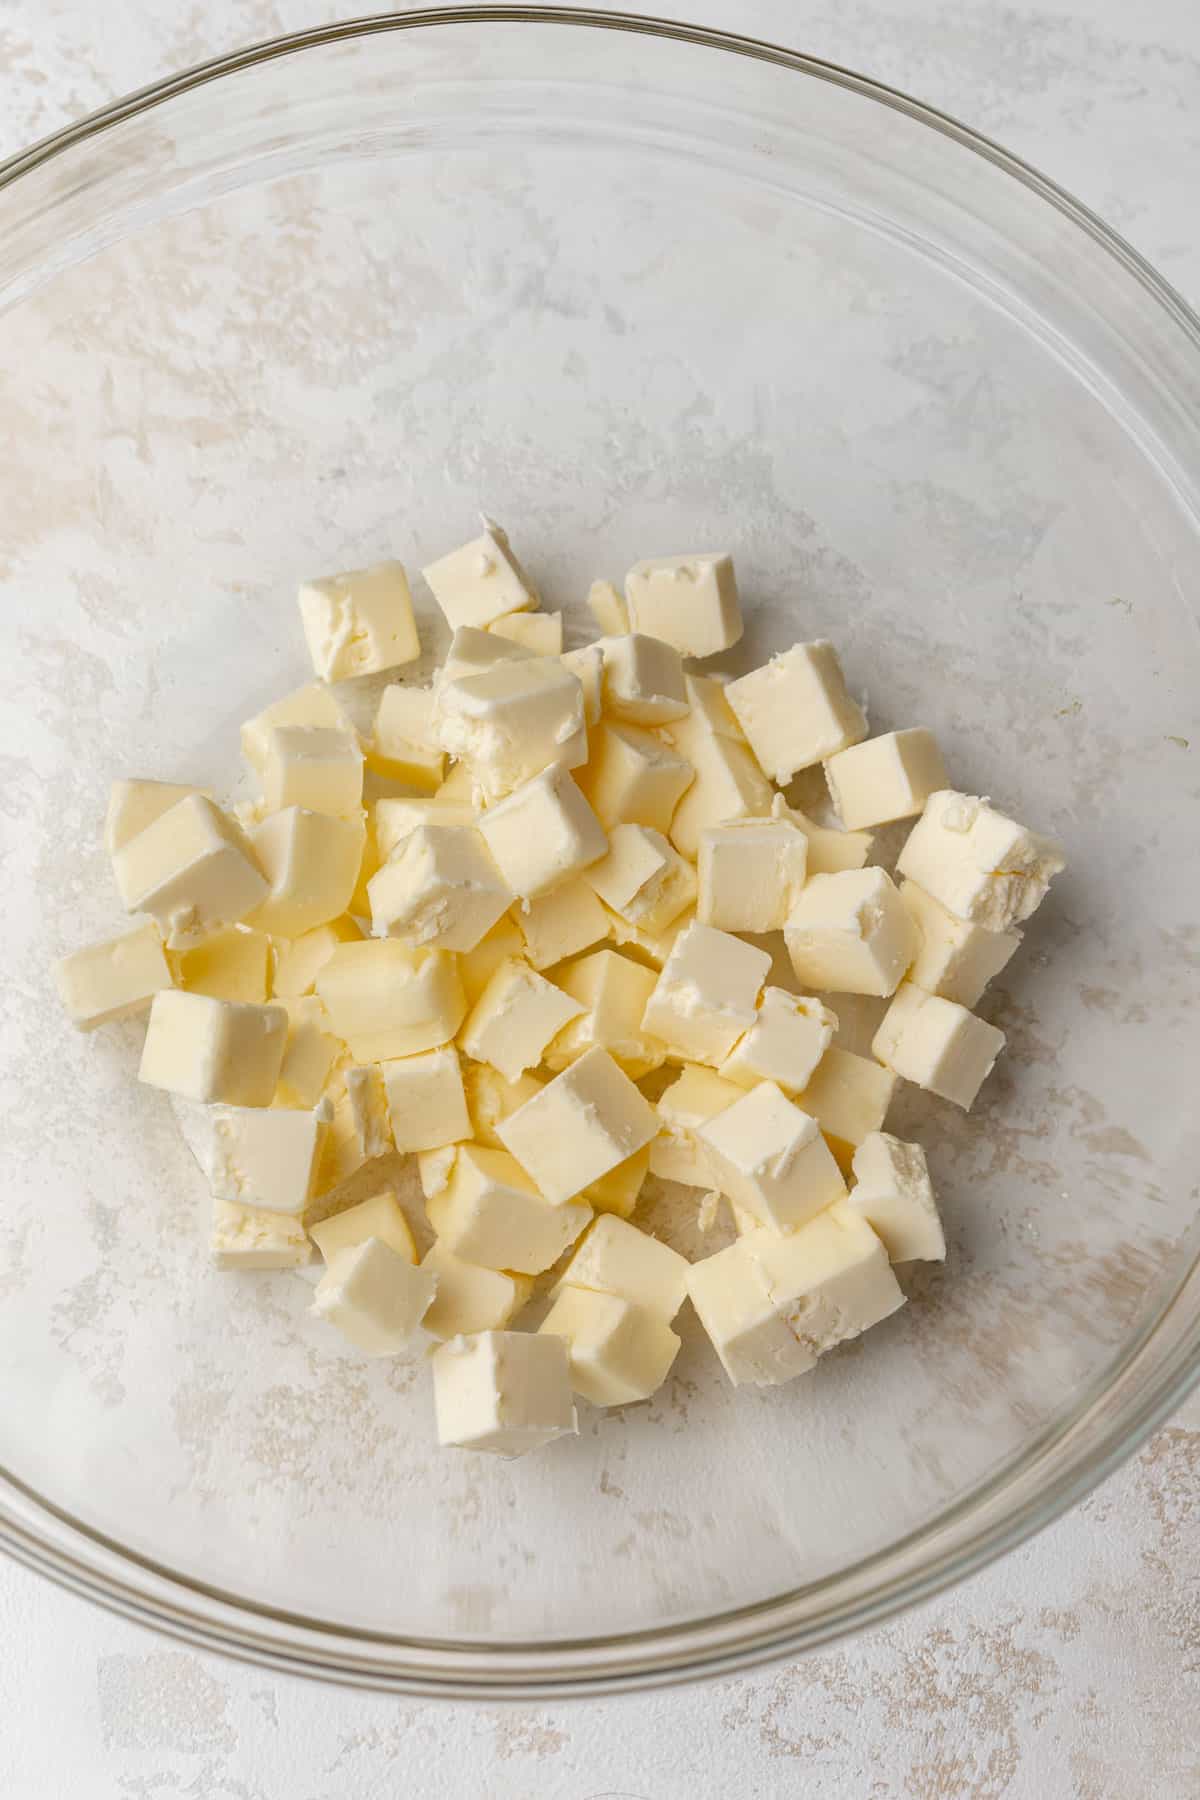 Cubed butter in a glass mixing bowl.